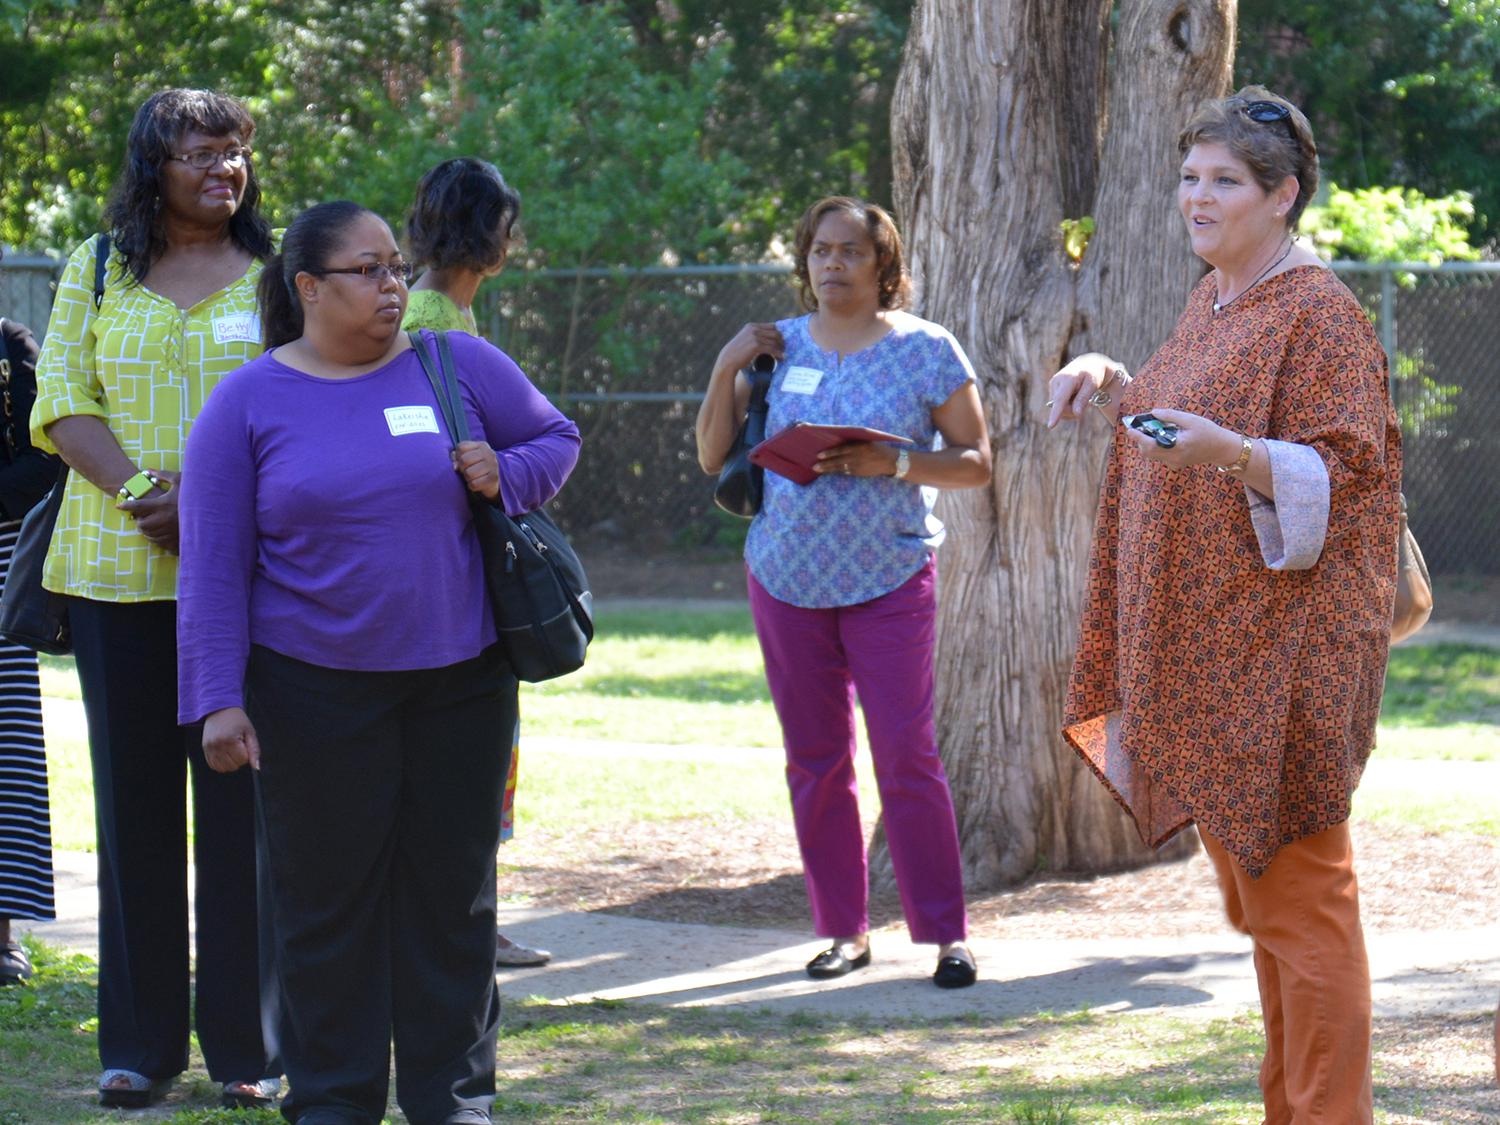 The Mississippi State University Aiken Village Preschool director Lucy Bryant, on right, led a tour of the facility and playground for a group of early care and education providers interested in quality improvements. (Submitted photo)